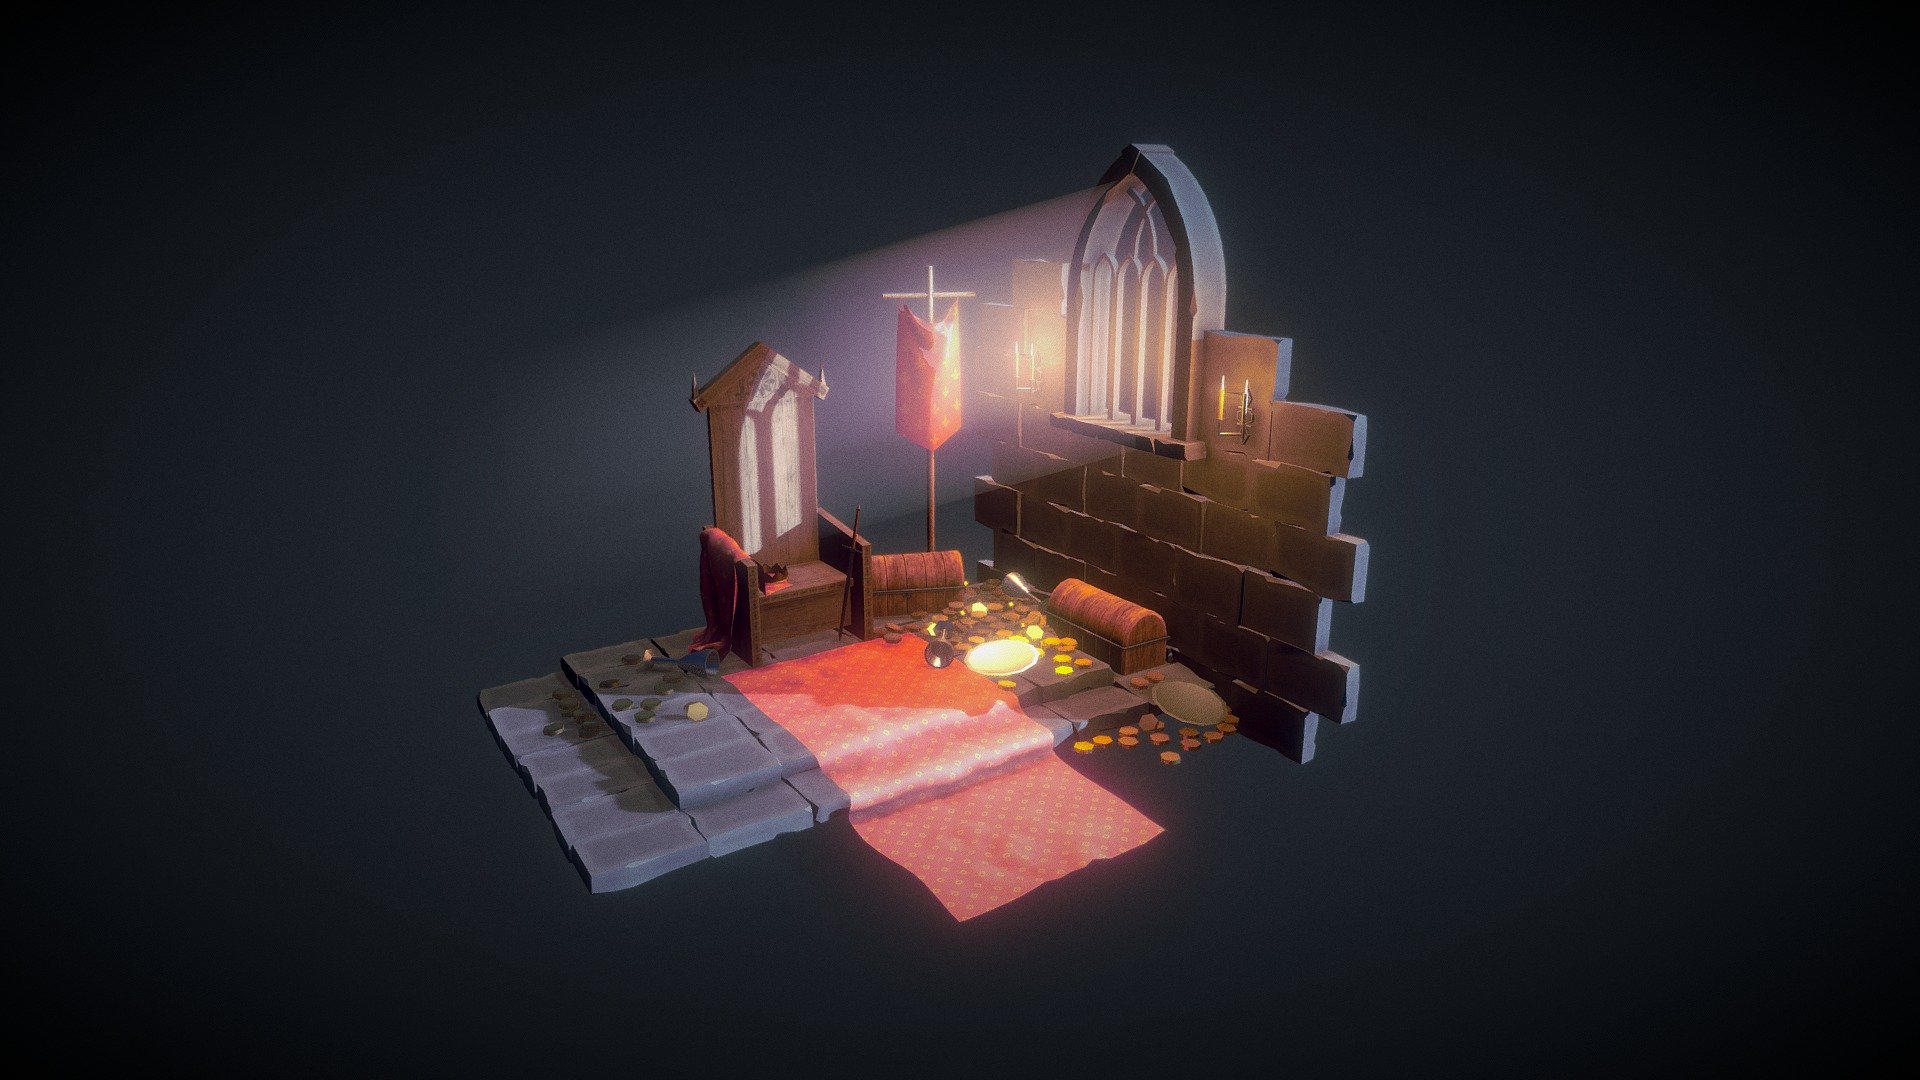 Art test I did for a big mobile studio. Really enjoyed working on this style, hope you like it smiley!

Unreal renders on my artstation here: https://www.artstation.com/artwork/ELzoQN - King's Throne Diorama - Download Free 3D model by sakislaspas 3d model